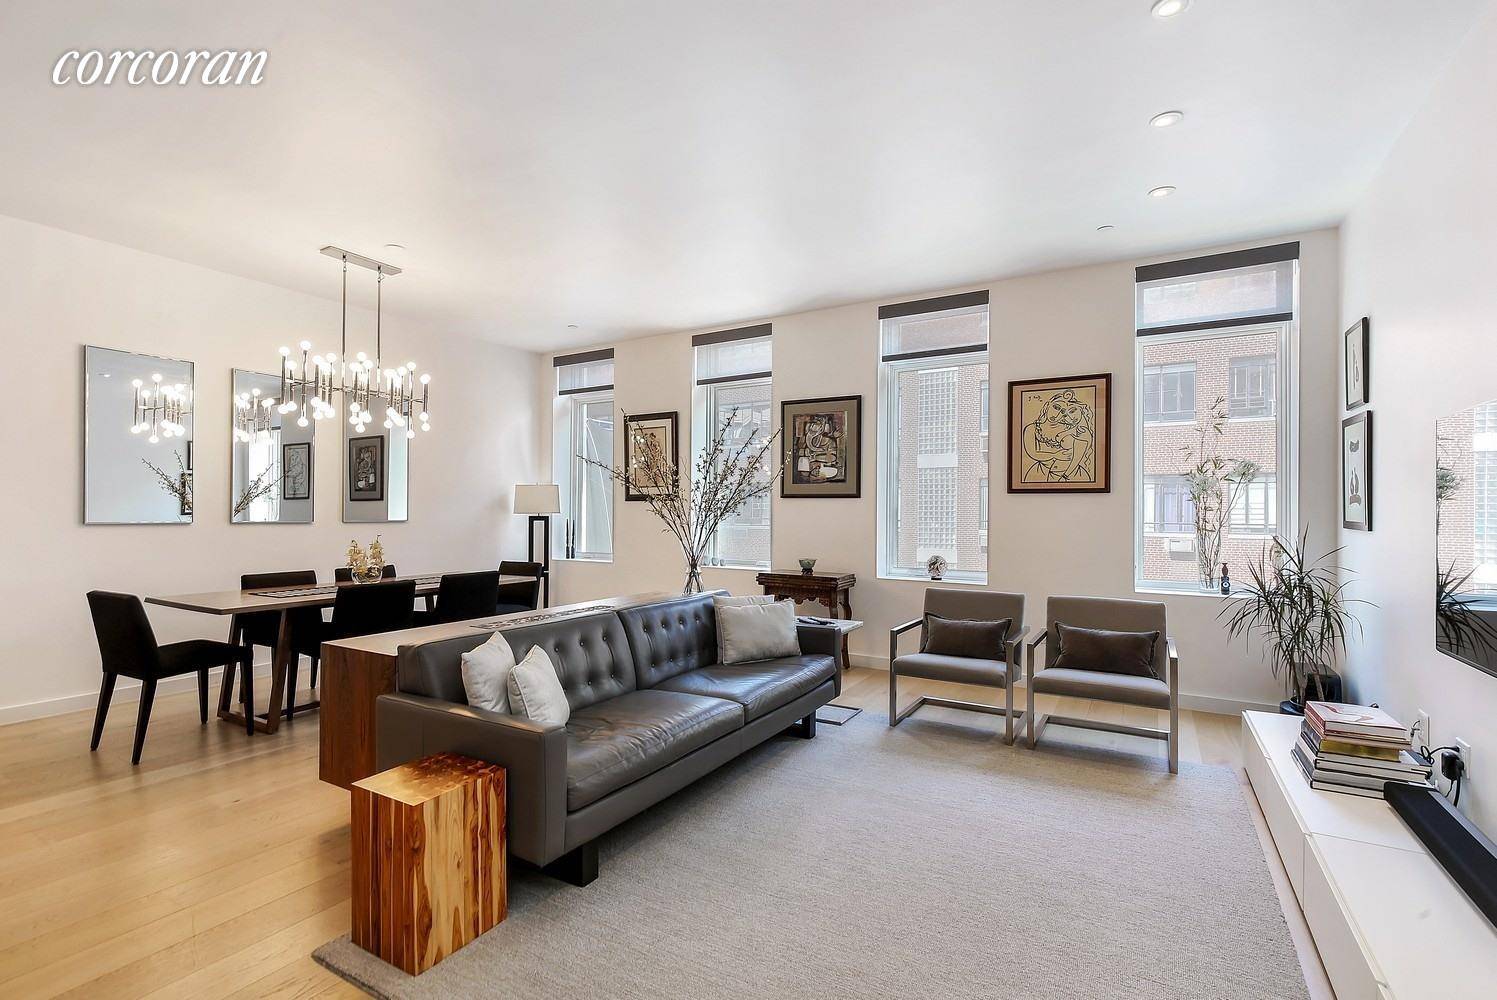 Spectacular sprawling Tribeca full floor 1550 sq ft 2BR 2BTH loft at 77 Warren Street an intimate 4 unit boutique condominium with architecture and interiors by Andre Kikoski.